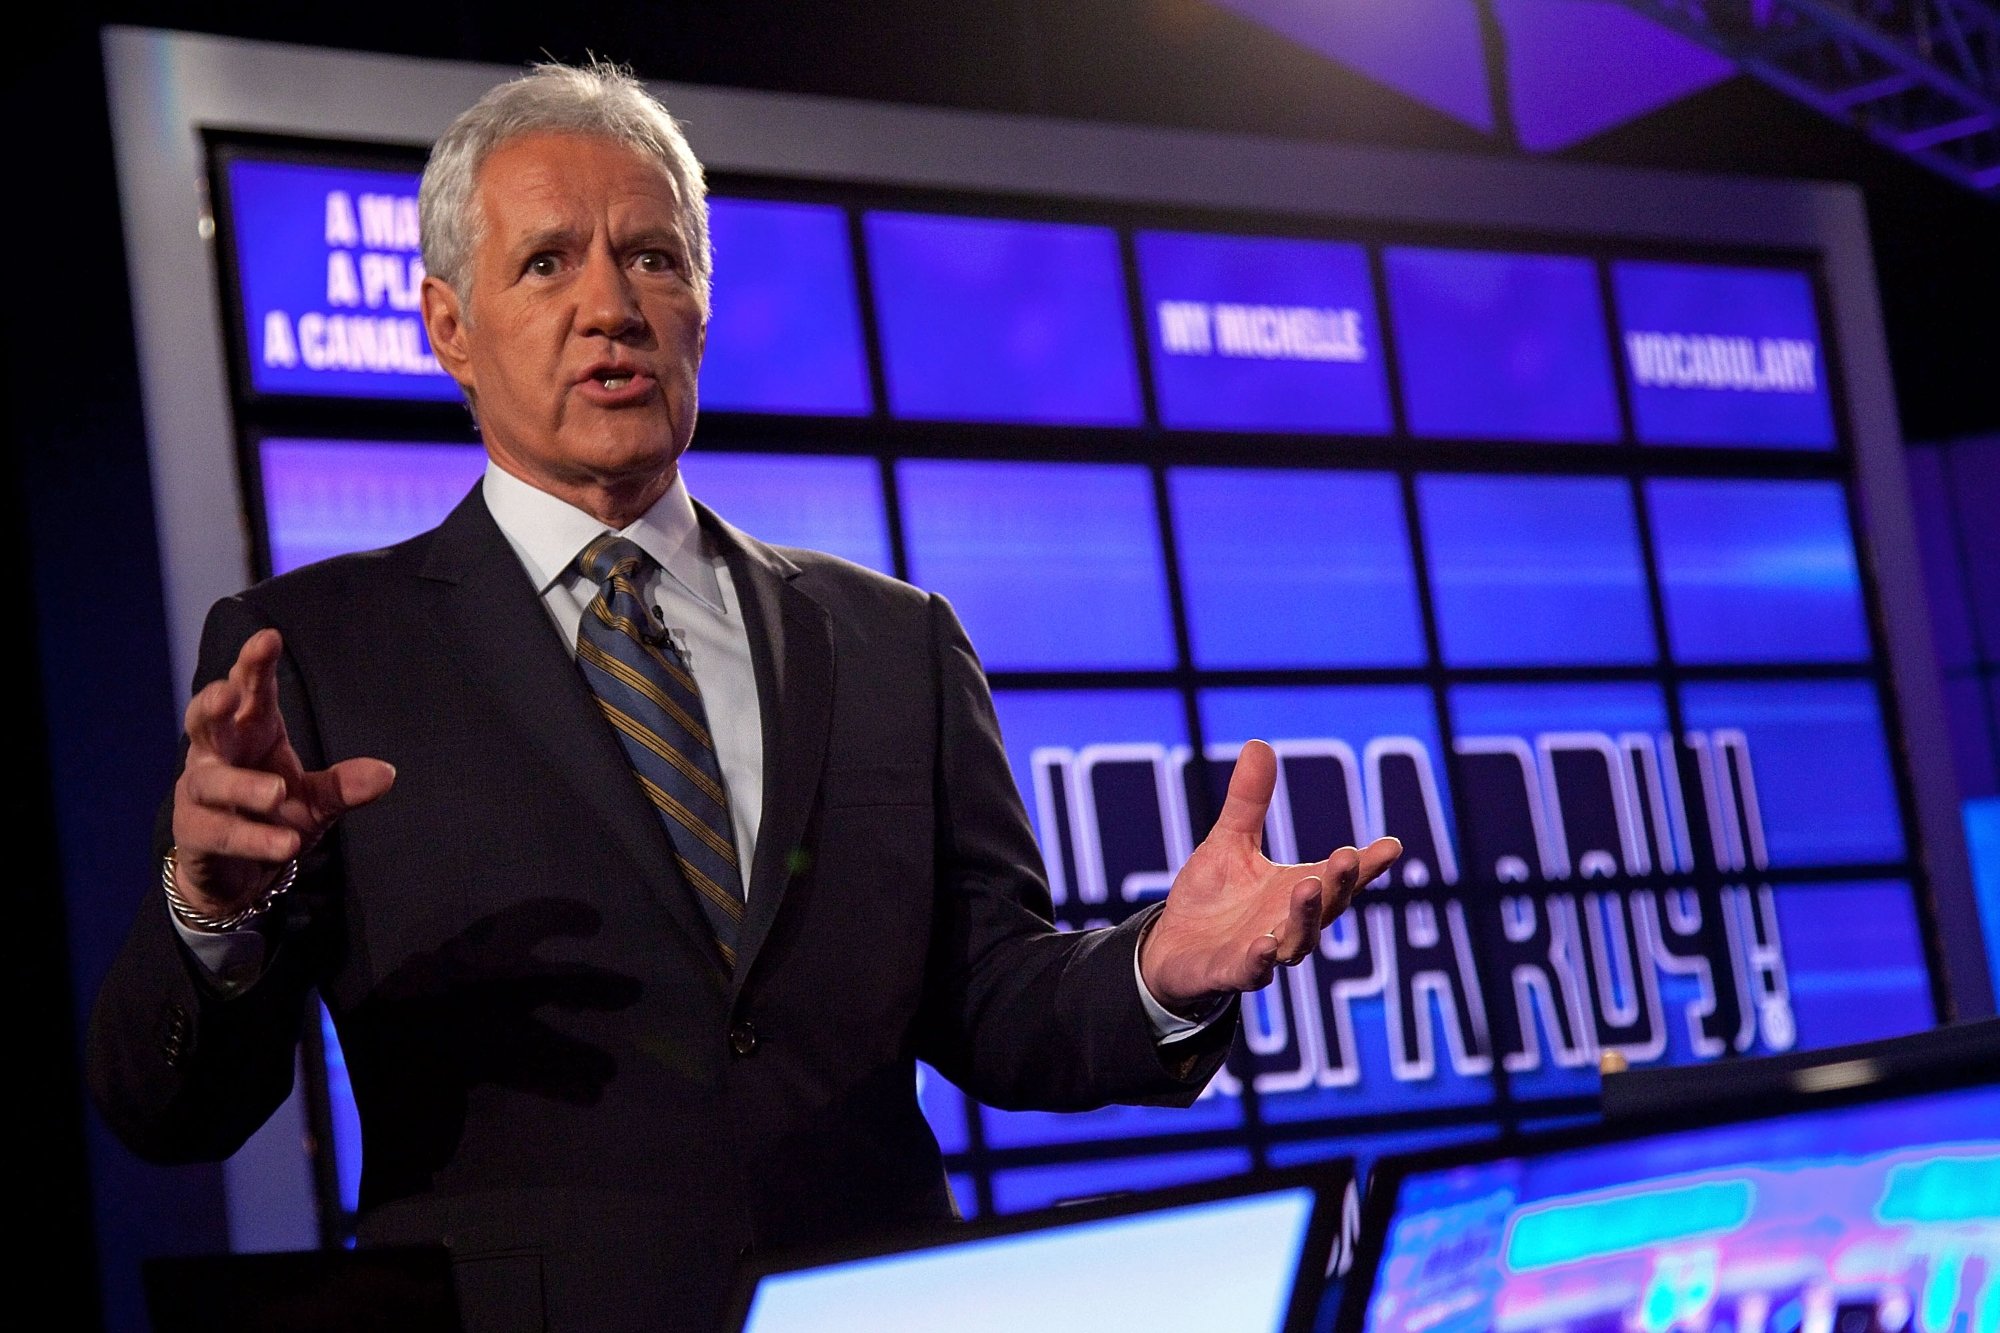 ‘Jeopardy!’: 1 Contestant Used Multiple Social Security Numbers to Cheat the Show’s Sacred Rules Before ‘Scolding’ Alex Trebek